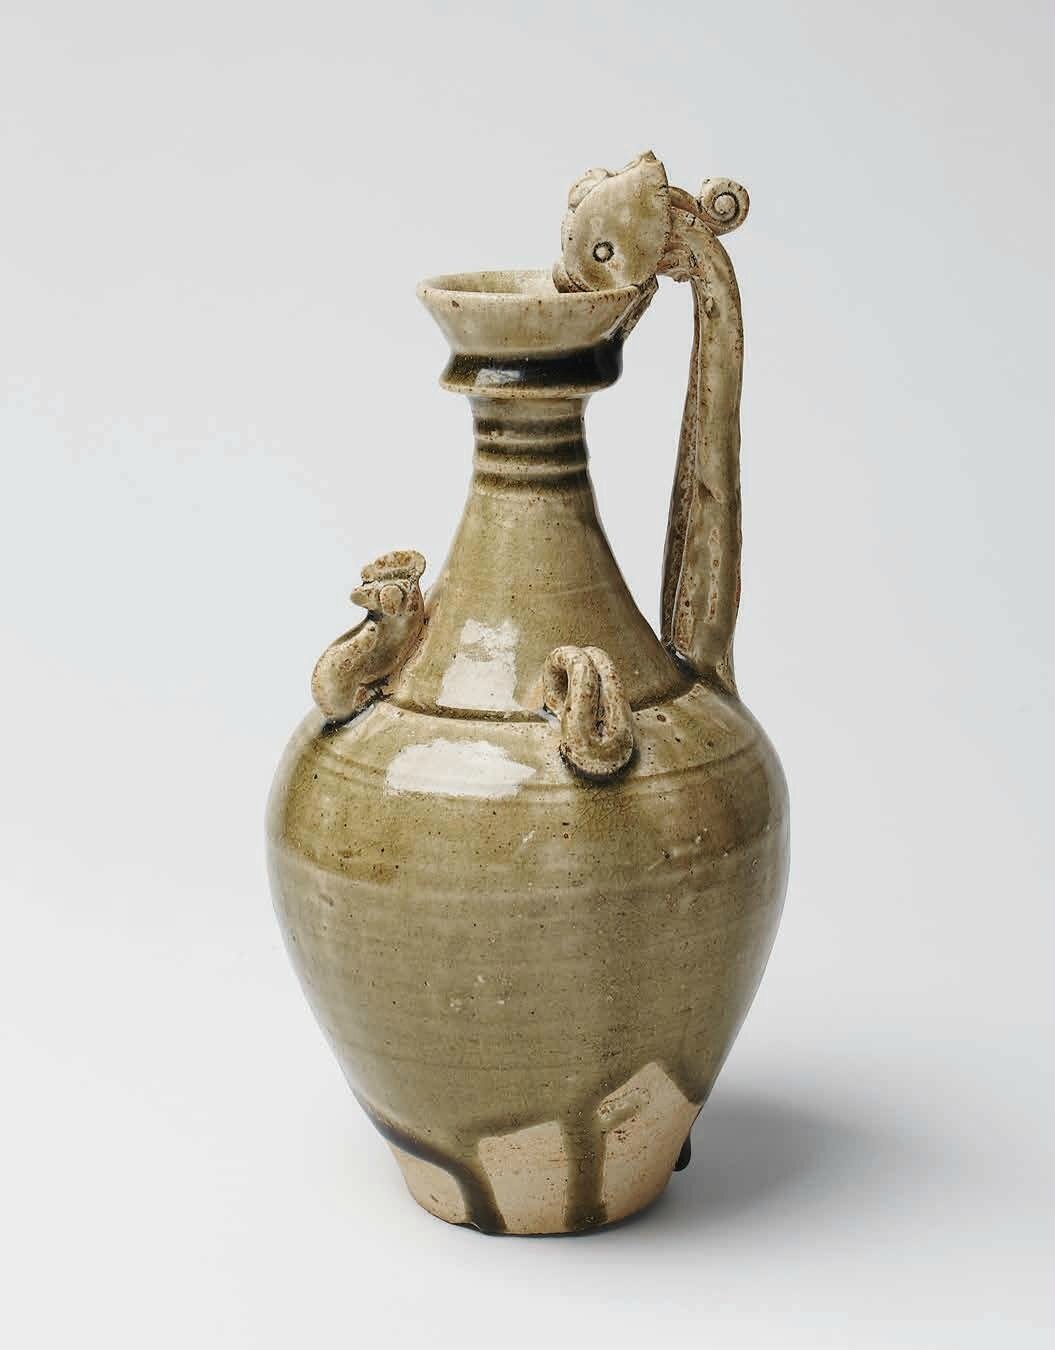 Green Glazed Amphora, Late Sui – Early Tang Dynasty, 6th – 7th c